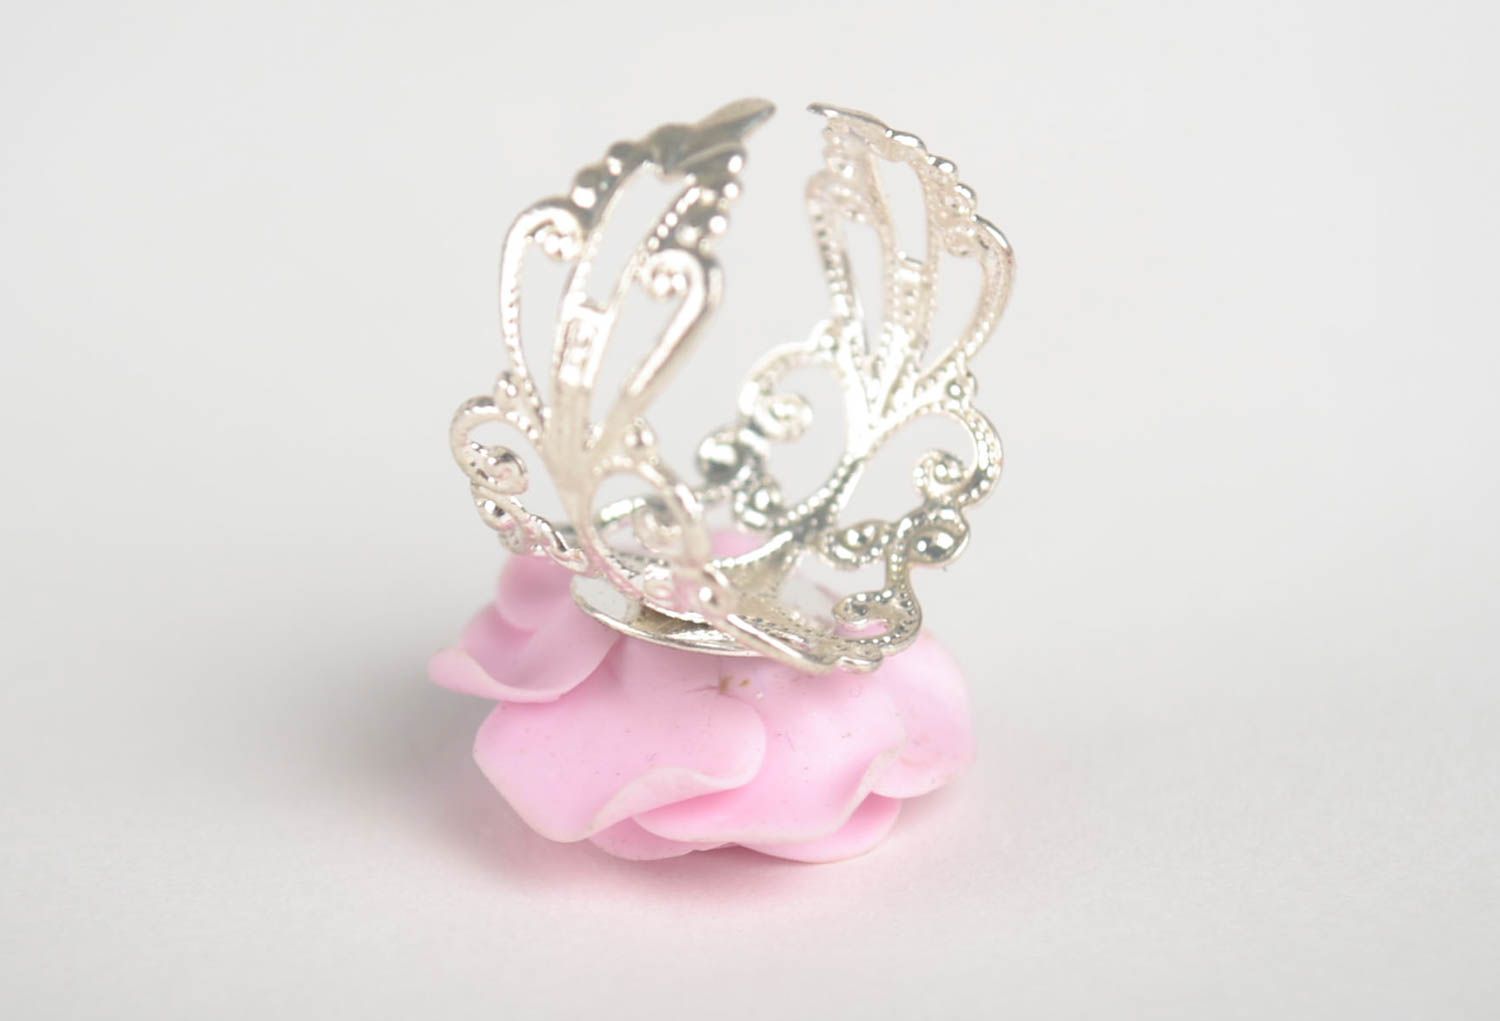 Beautiful handmade plastic ring flower ring cool jewelry polymer clay ideas photo 3